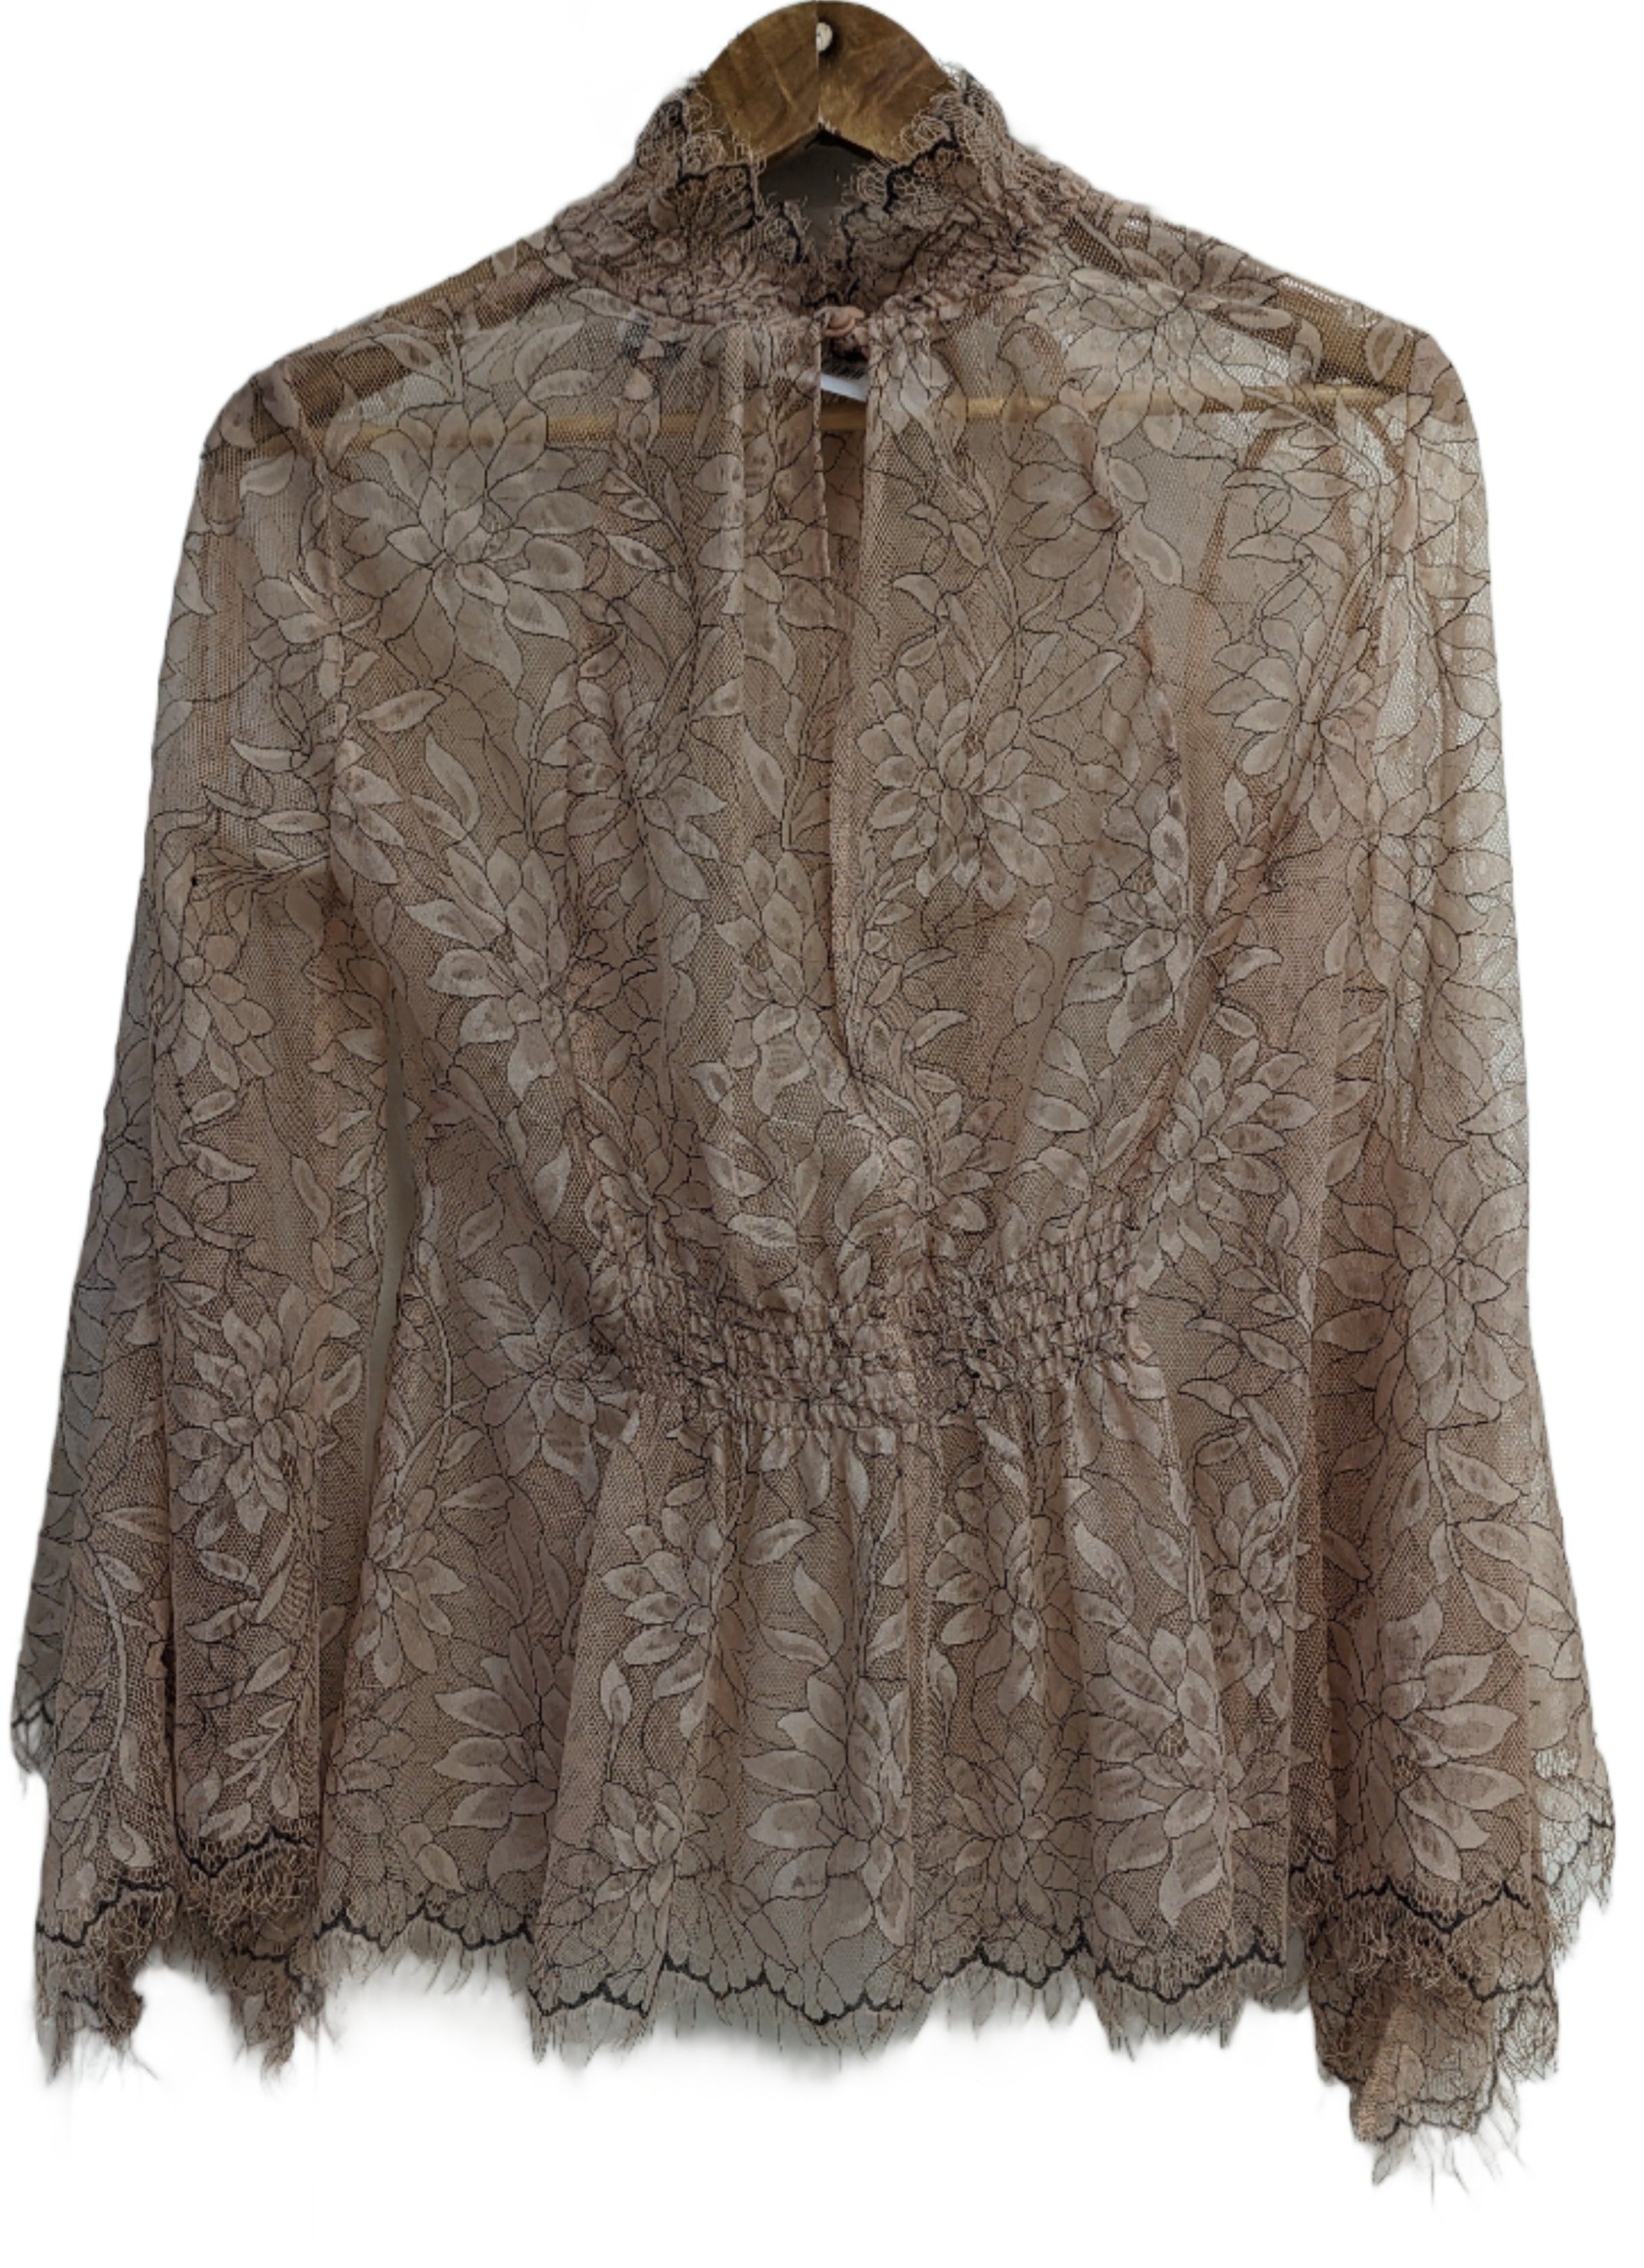 Alice McCall Nude Lace Blouse